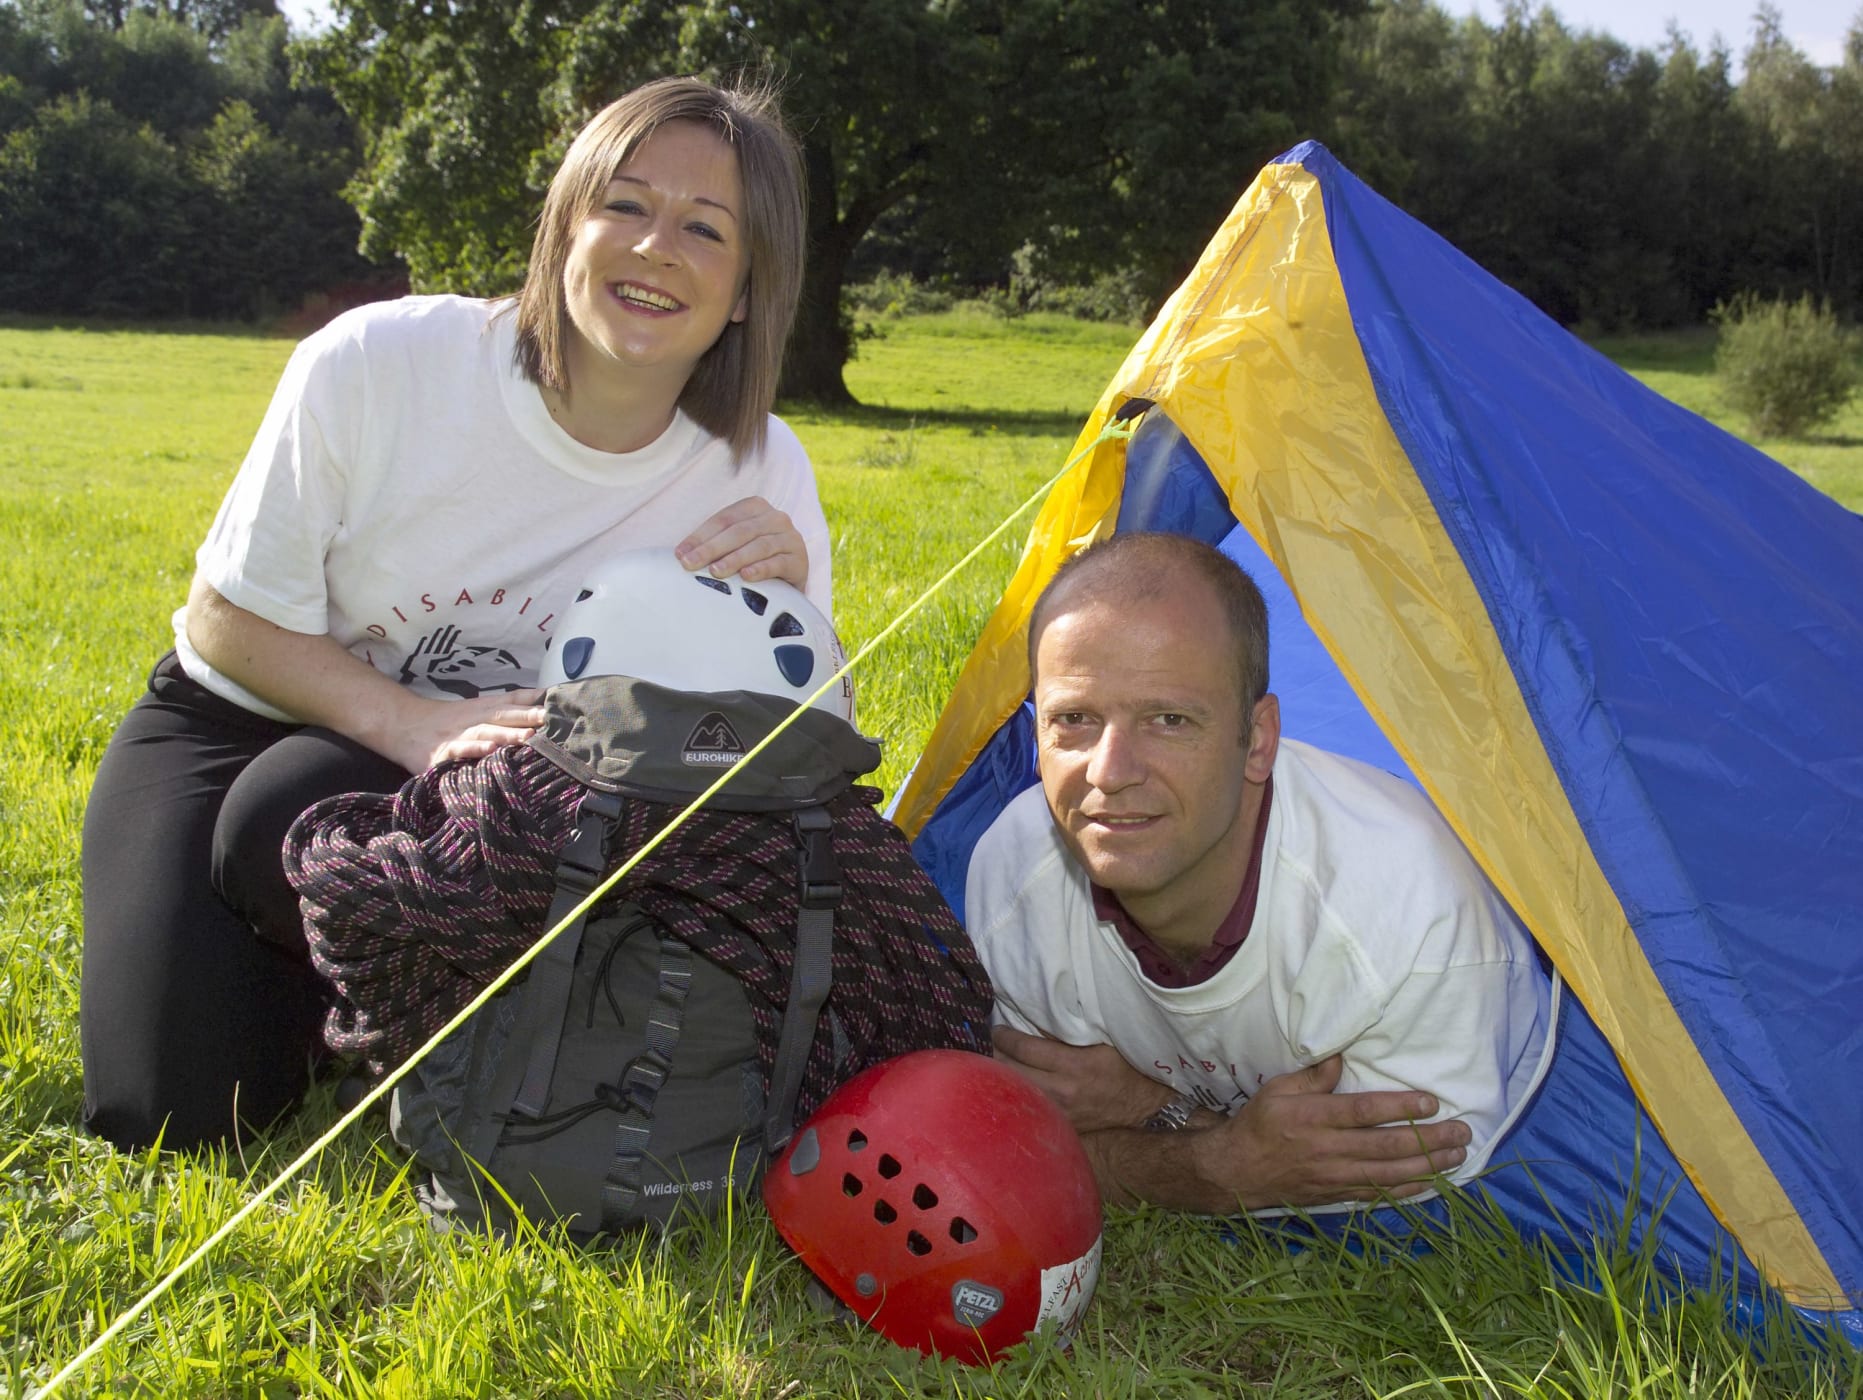 Image of Darren Campbell in a tent and Clare Sheeran from Disability Action in a Disability Action t-shirt